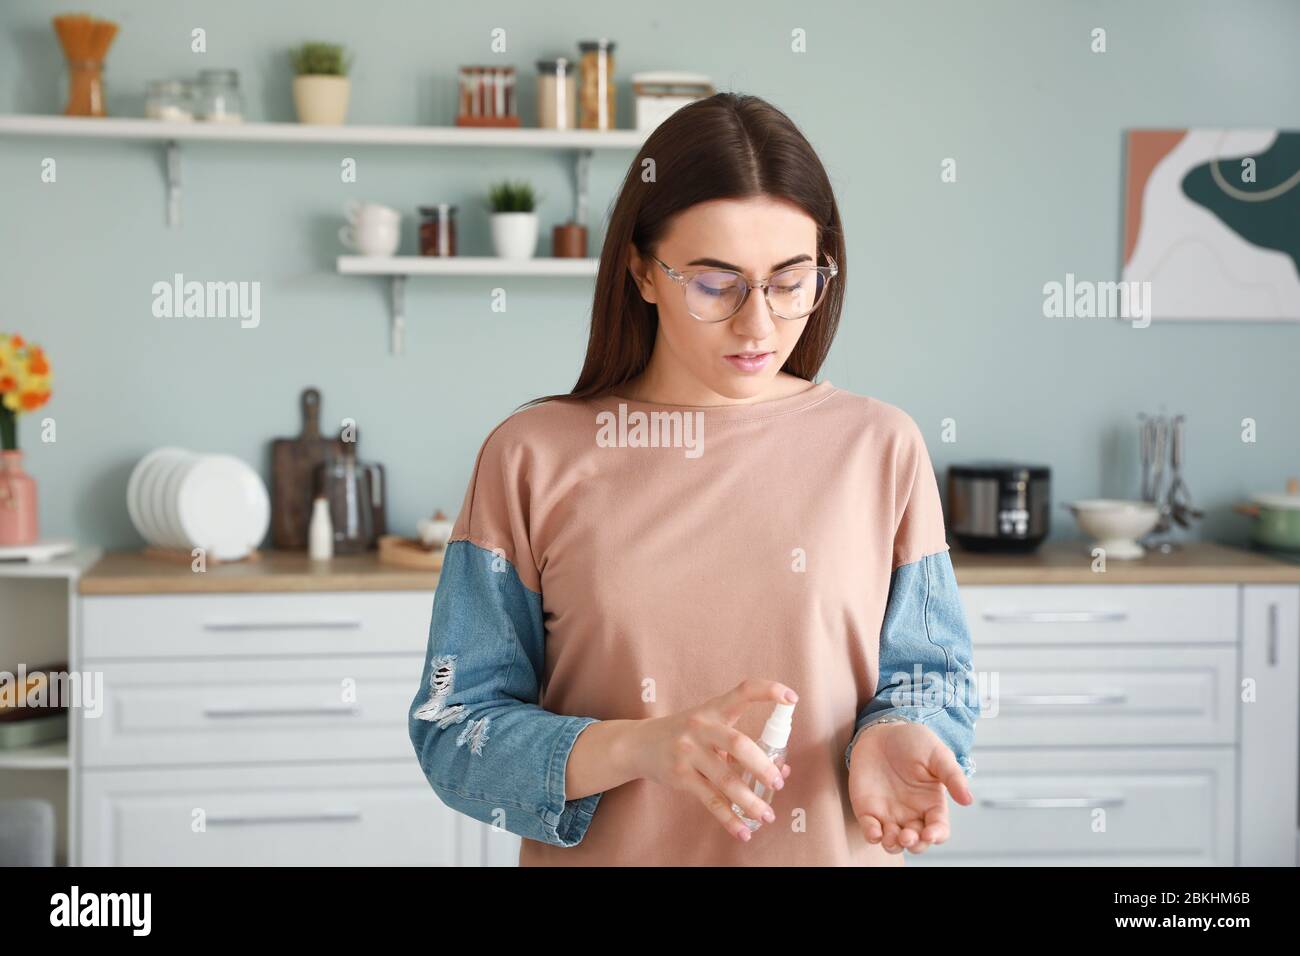 Woman applying disinfectant onto hands at home Stock Photo